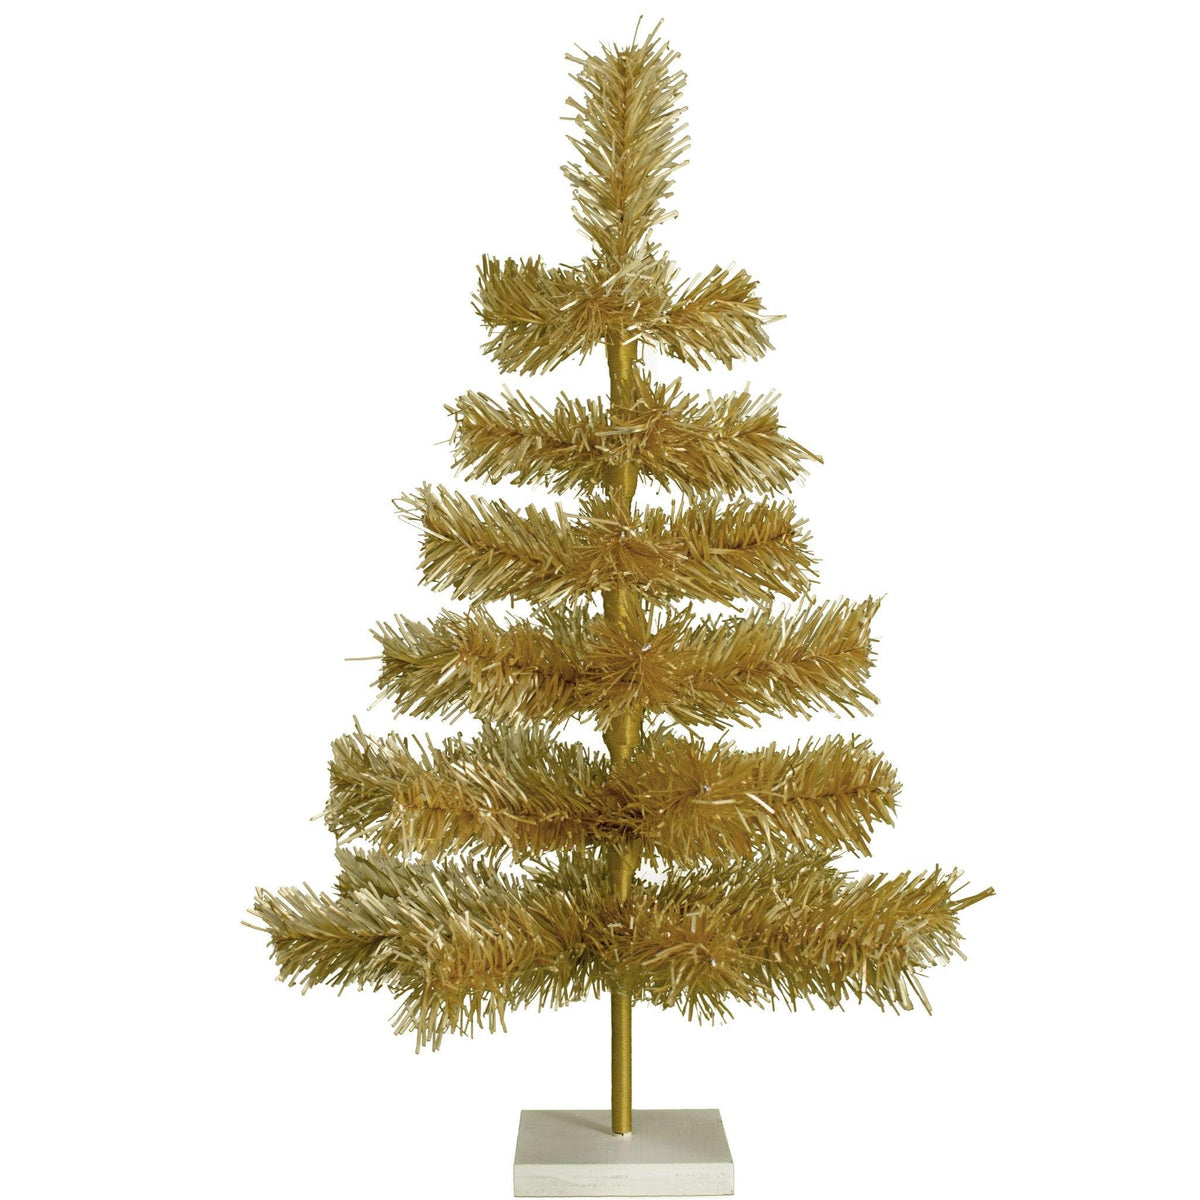 Our 24in Tall Antique Gold Christmas Tree.  Celebrate Lee Display's 120th Anniversary with our brand new Antique Gold colored tinsel Christmas Trees.  Shop for antique gold christmas trees at leedisplay.com